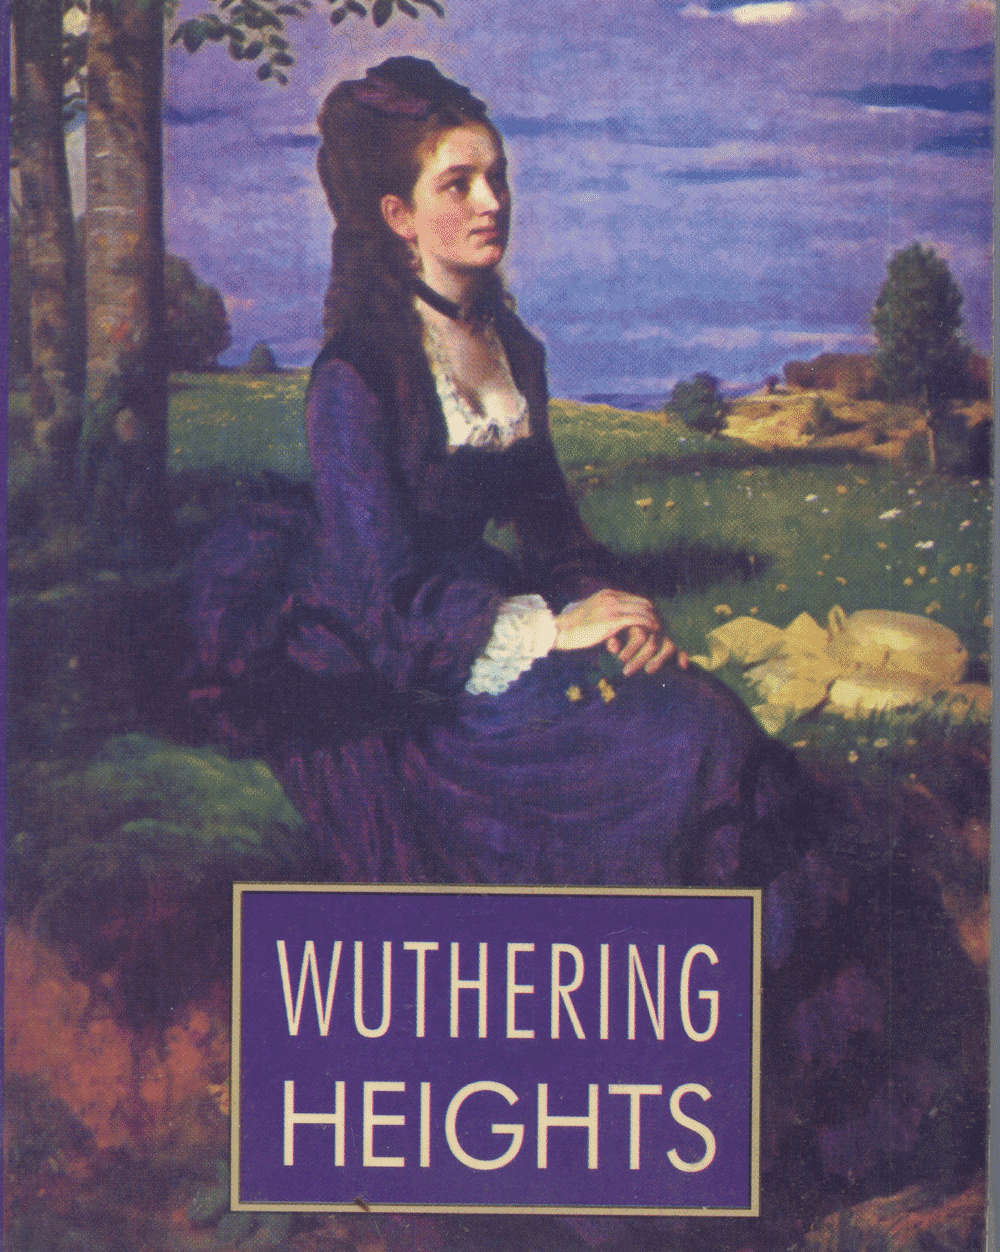 emily bronte wuthering heights movie 2011